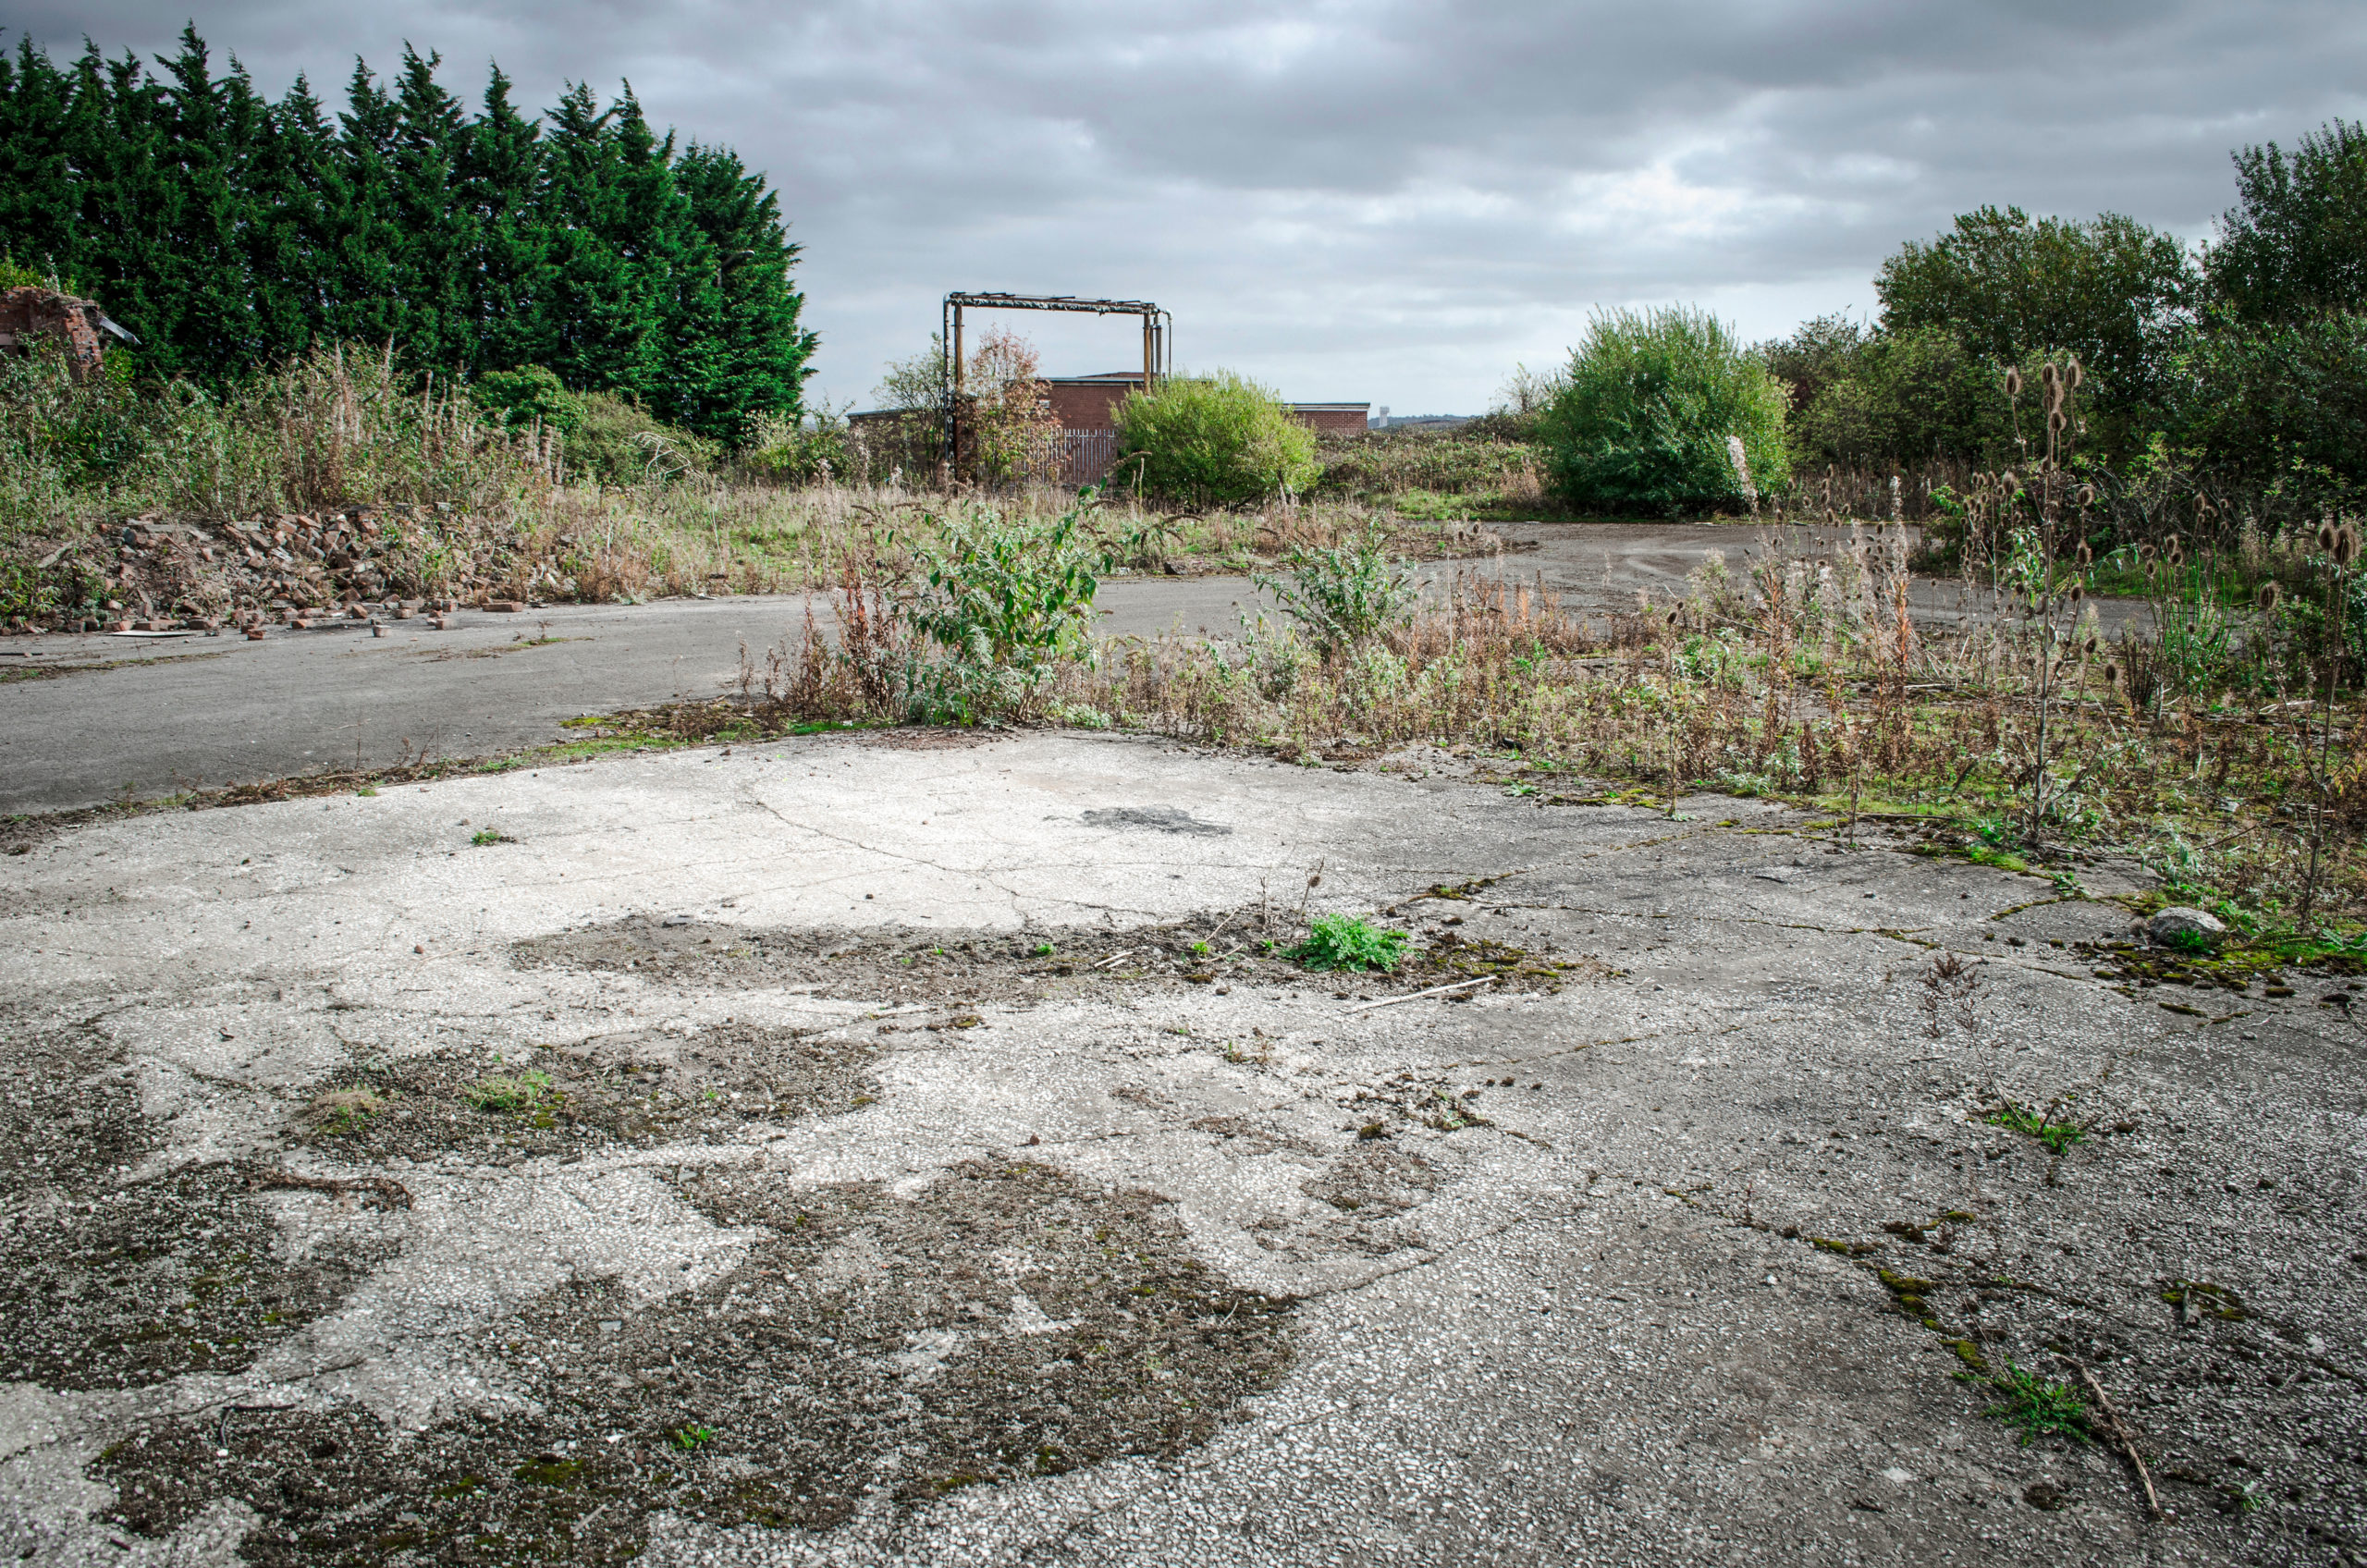 brownfield land, site of former chemical factory recently demoli